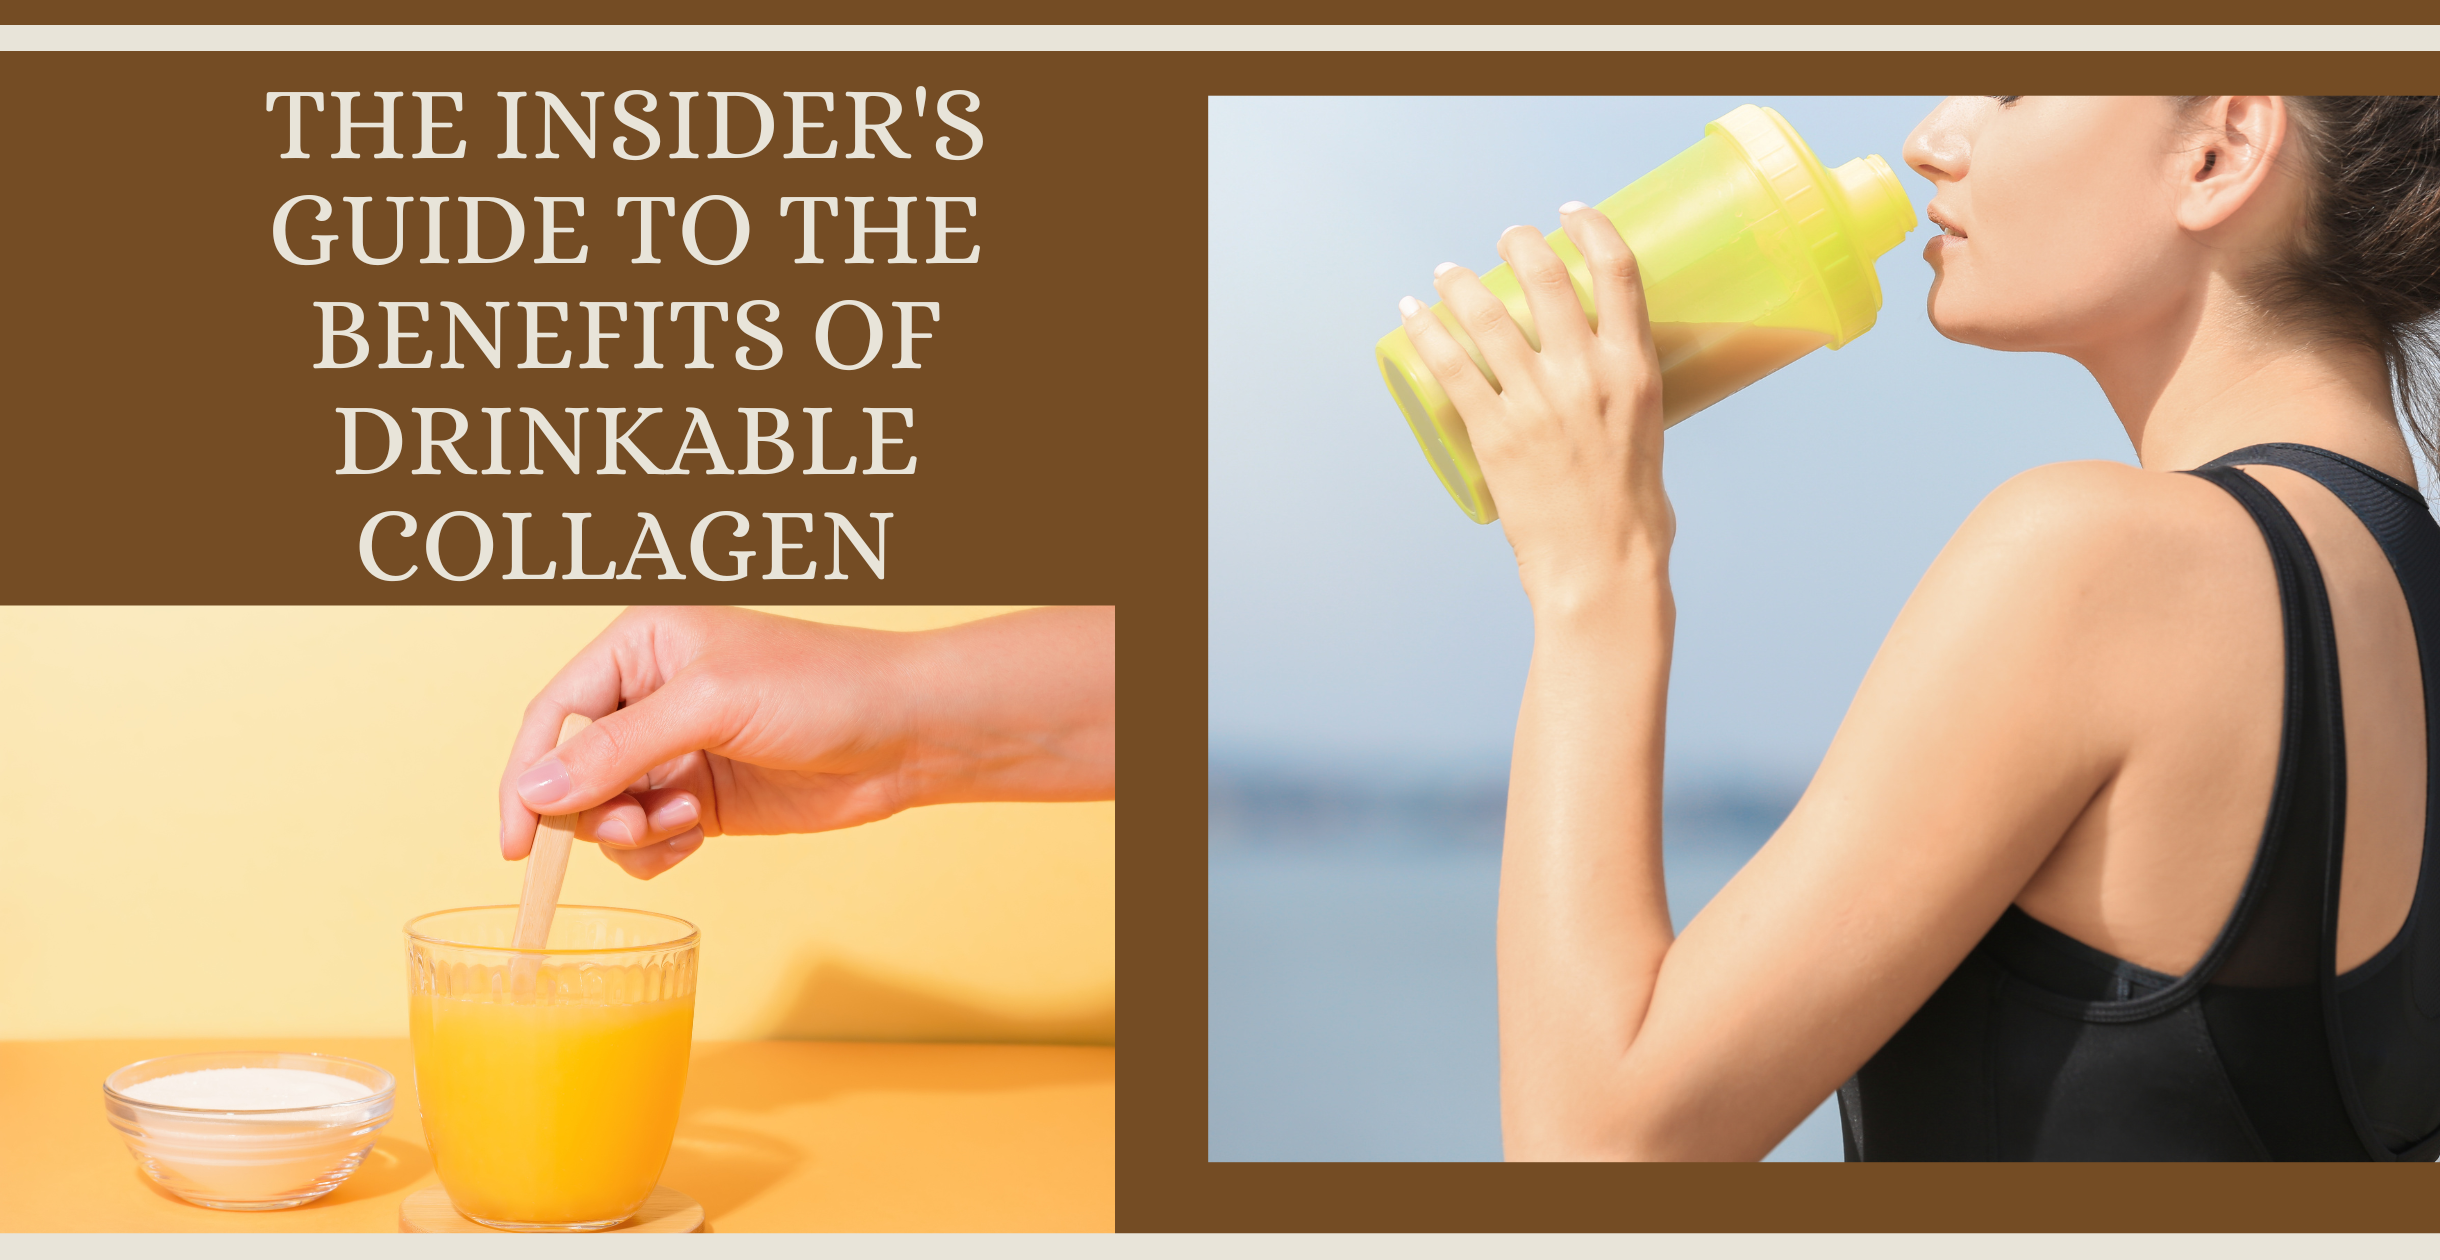 The Insider's Guide to the Benefits of Drinkable Collagen